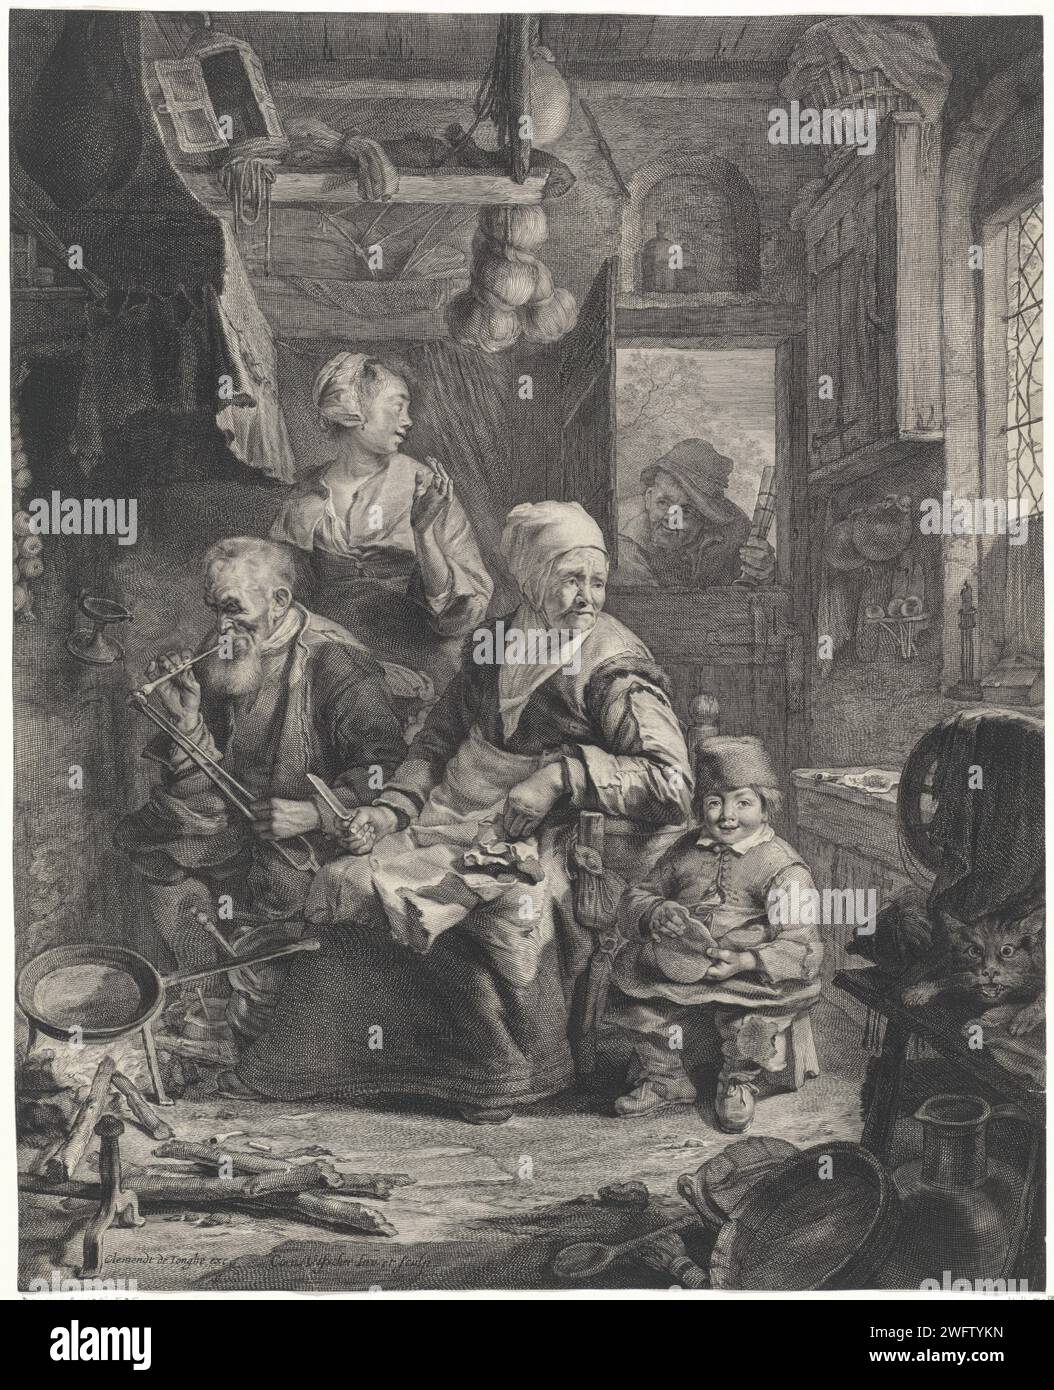 Pancake Bakster, Cornelis Visscher (II), 1638 - 1670 print In a kitchen an old woman is baking pancakes for a fire. The frying pan is on the fire. Next to her a man with a pipe and a child with a pancake. Behind the smoking man a young woman and a small child. In the doorway is an old man with a glass. On the right a cat. Print Maker: Haarlem Publisher: Amsterdam paper etching / engraving pancakes. kitchen-interior. cat. pipe  tobacco Stock Photo